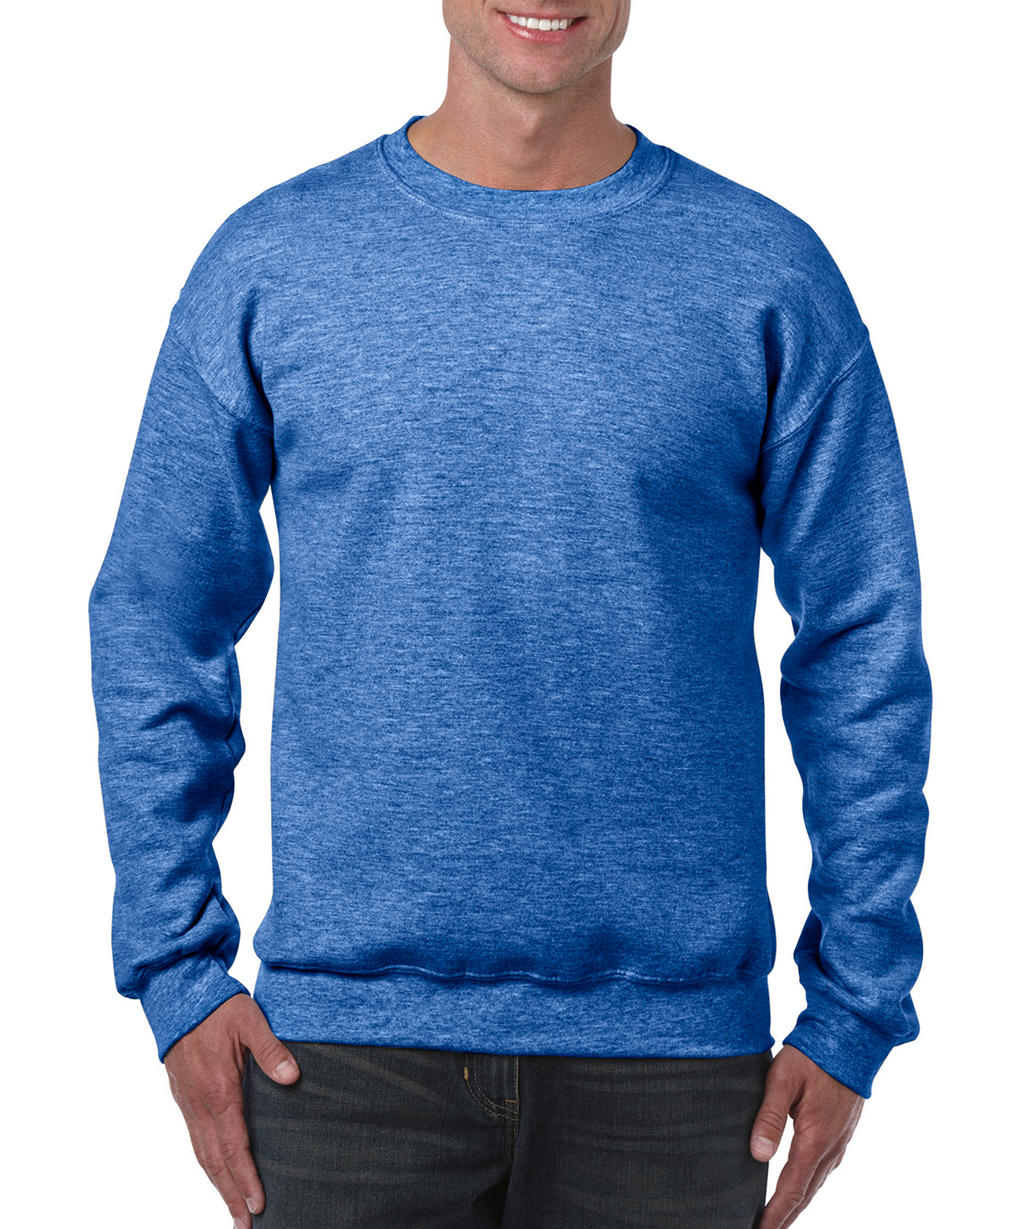  Heavy Blend Adult Crewneck Sweat in Farbe Heather Sport Royal